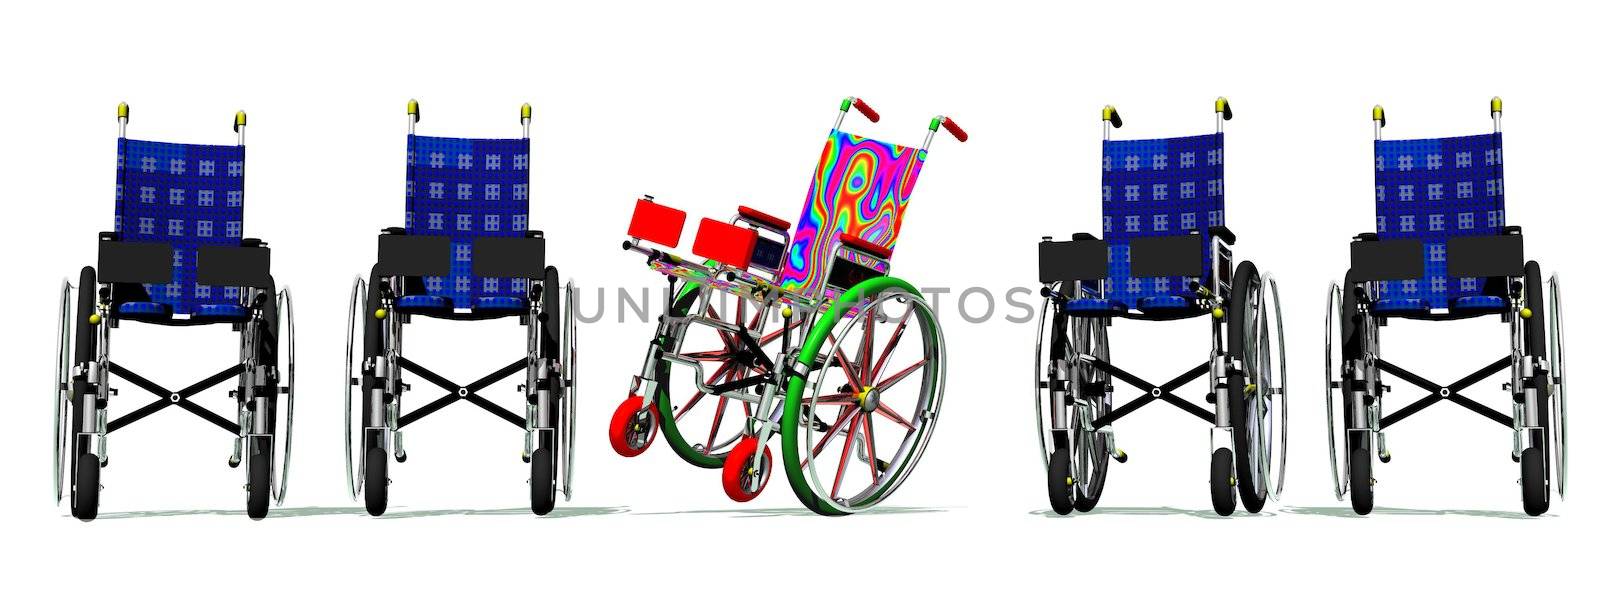 Funny and happy colorful wheelchair by Elenaphotos21